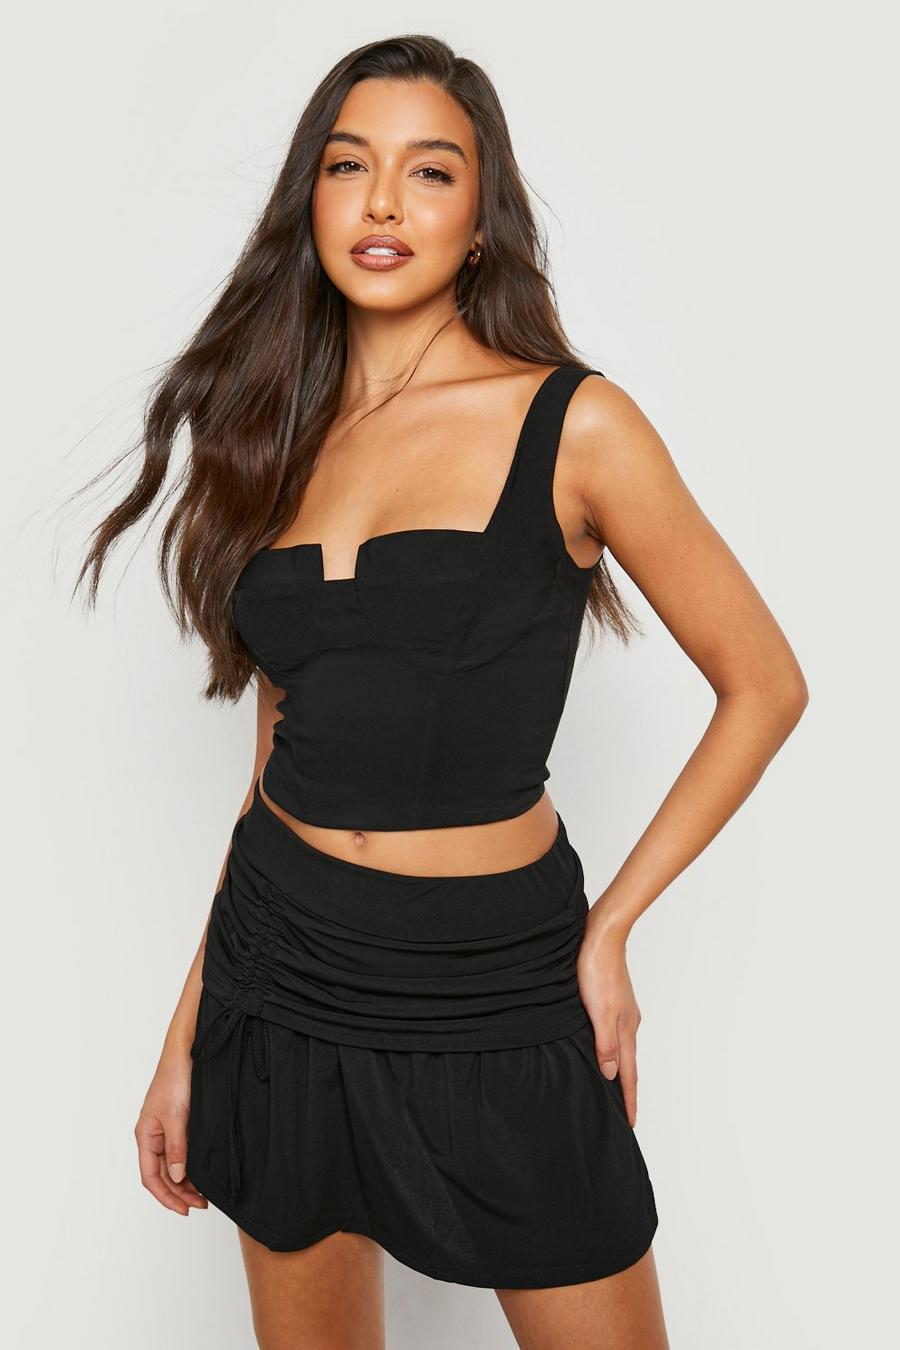 Black Low Rise Ruched Micro Mini Skirt